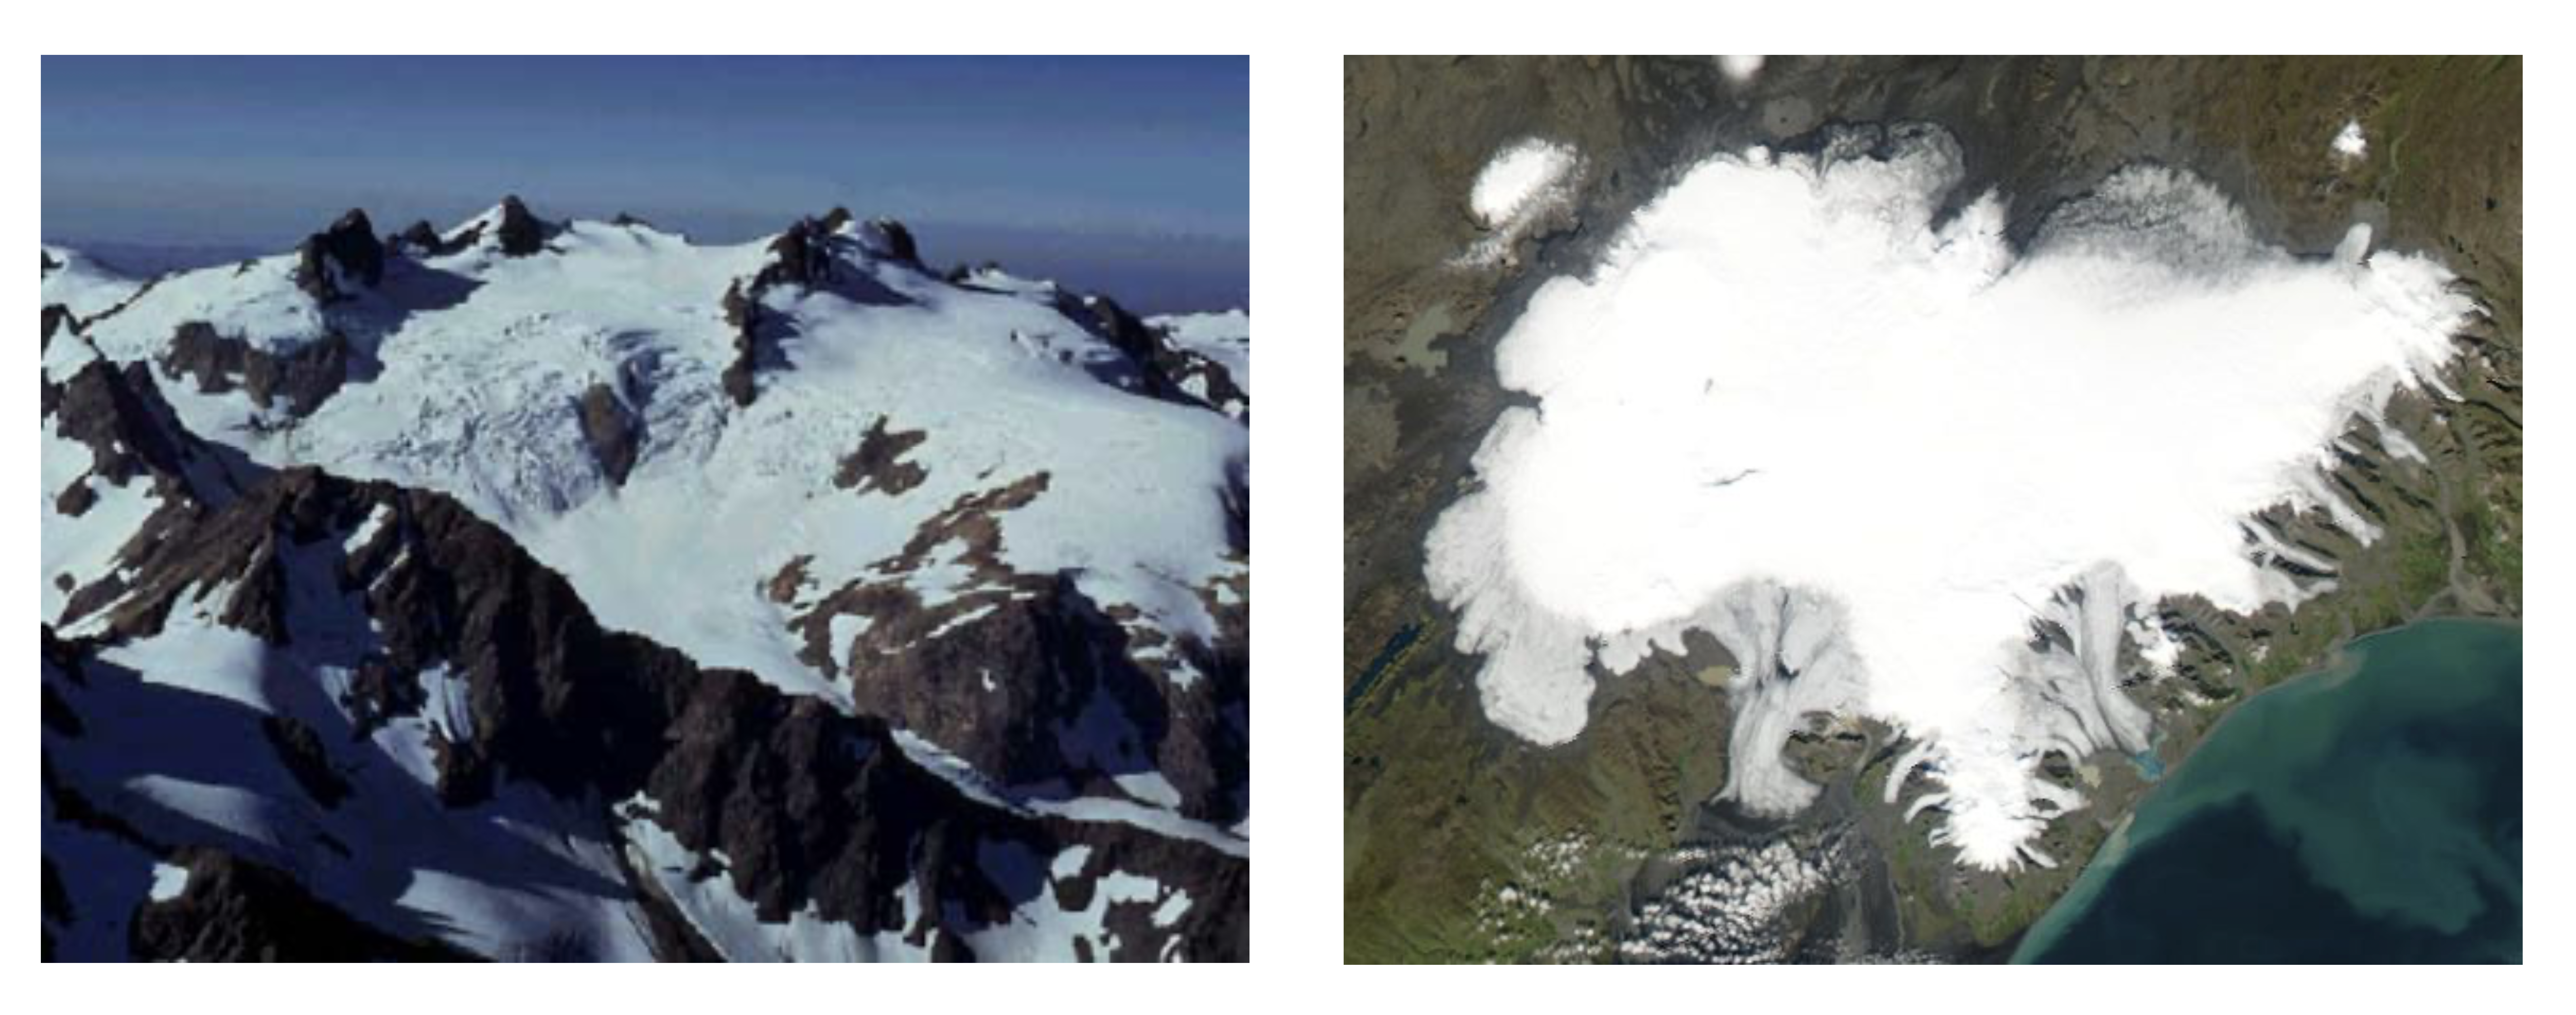 Two photos: the left photo shows the side profile of a rocky mountain that is covered with an ice cap. The right photo is an aerial view of a white ice cap covering a large area of land.